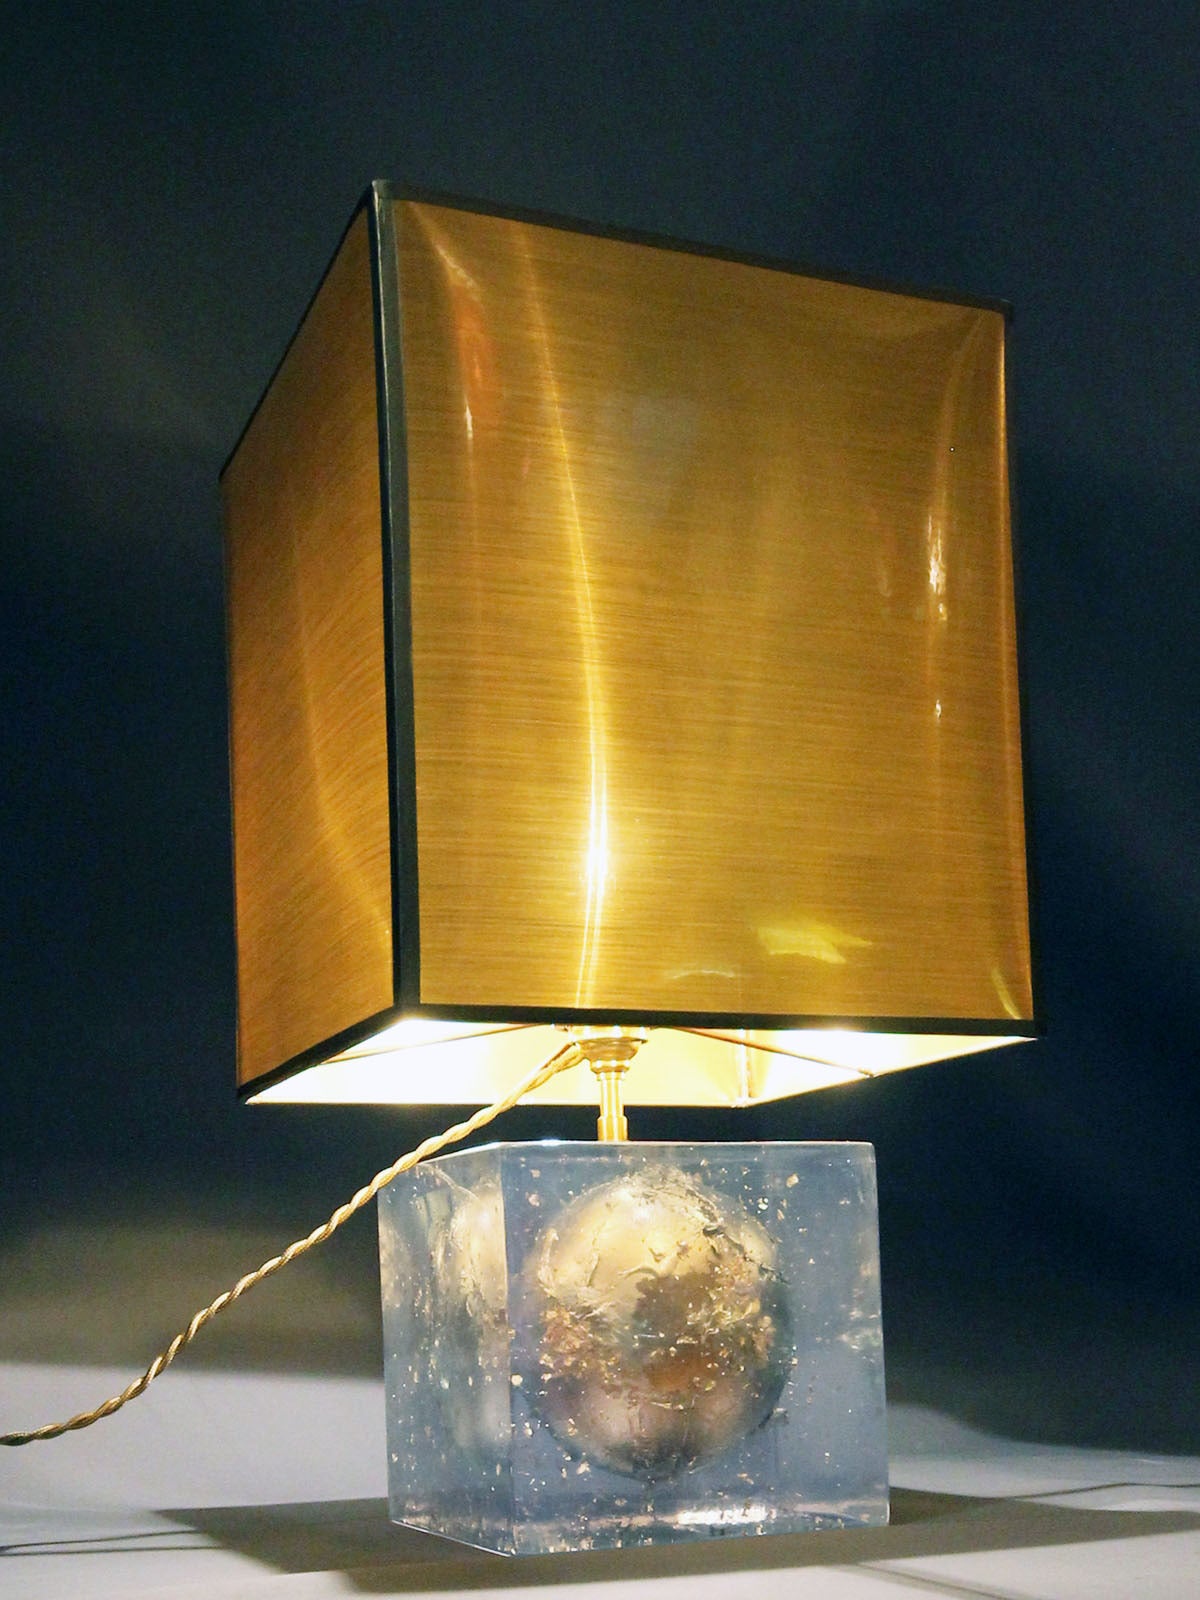 Nice pair of lamps with spheres and gold leaf inclusion.
New lampshades in gilded plastic.

Dimension below are given without lampshades.
Dimensions with lampshades are 9.84 X 9.84 X 18.5 in height (25x 25 47 cm height).